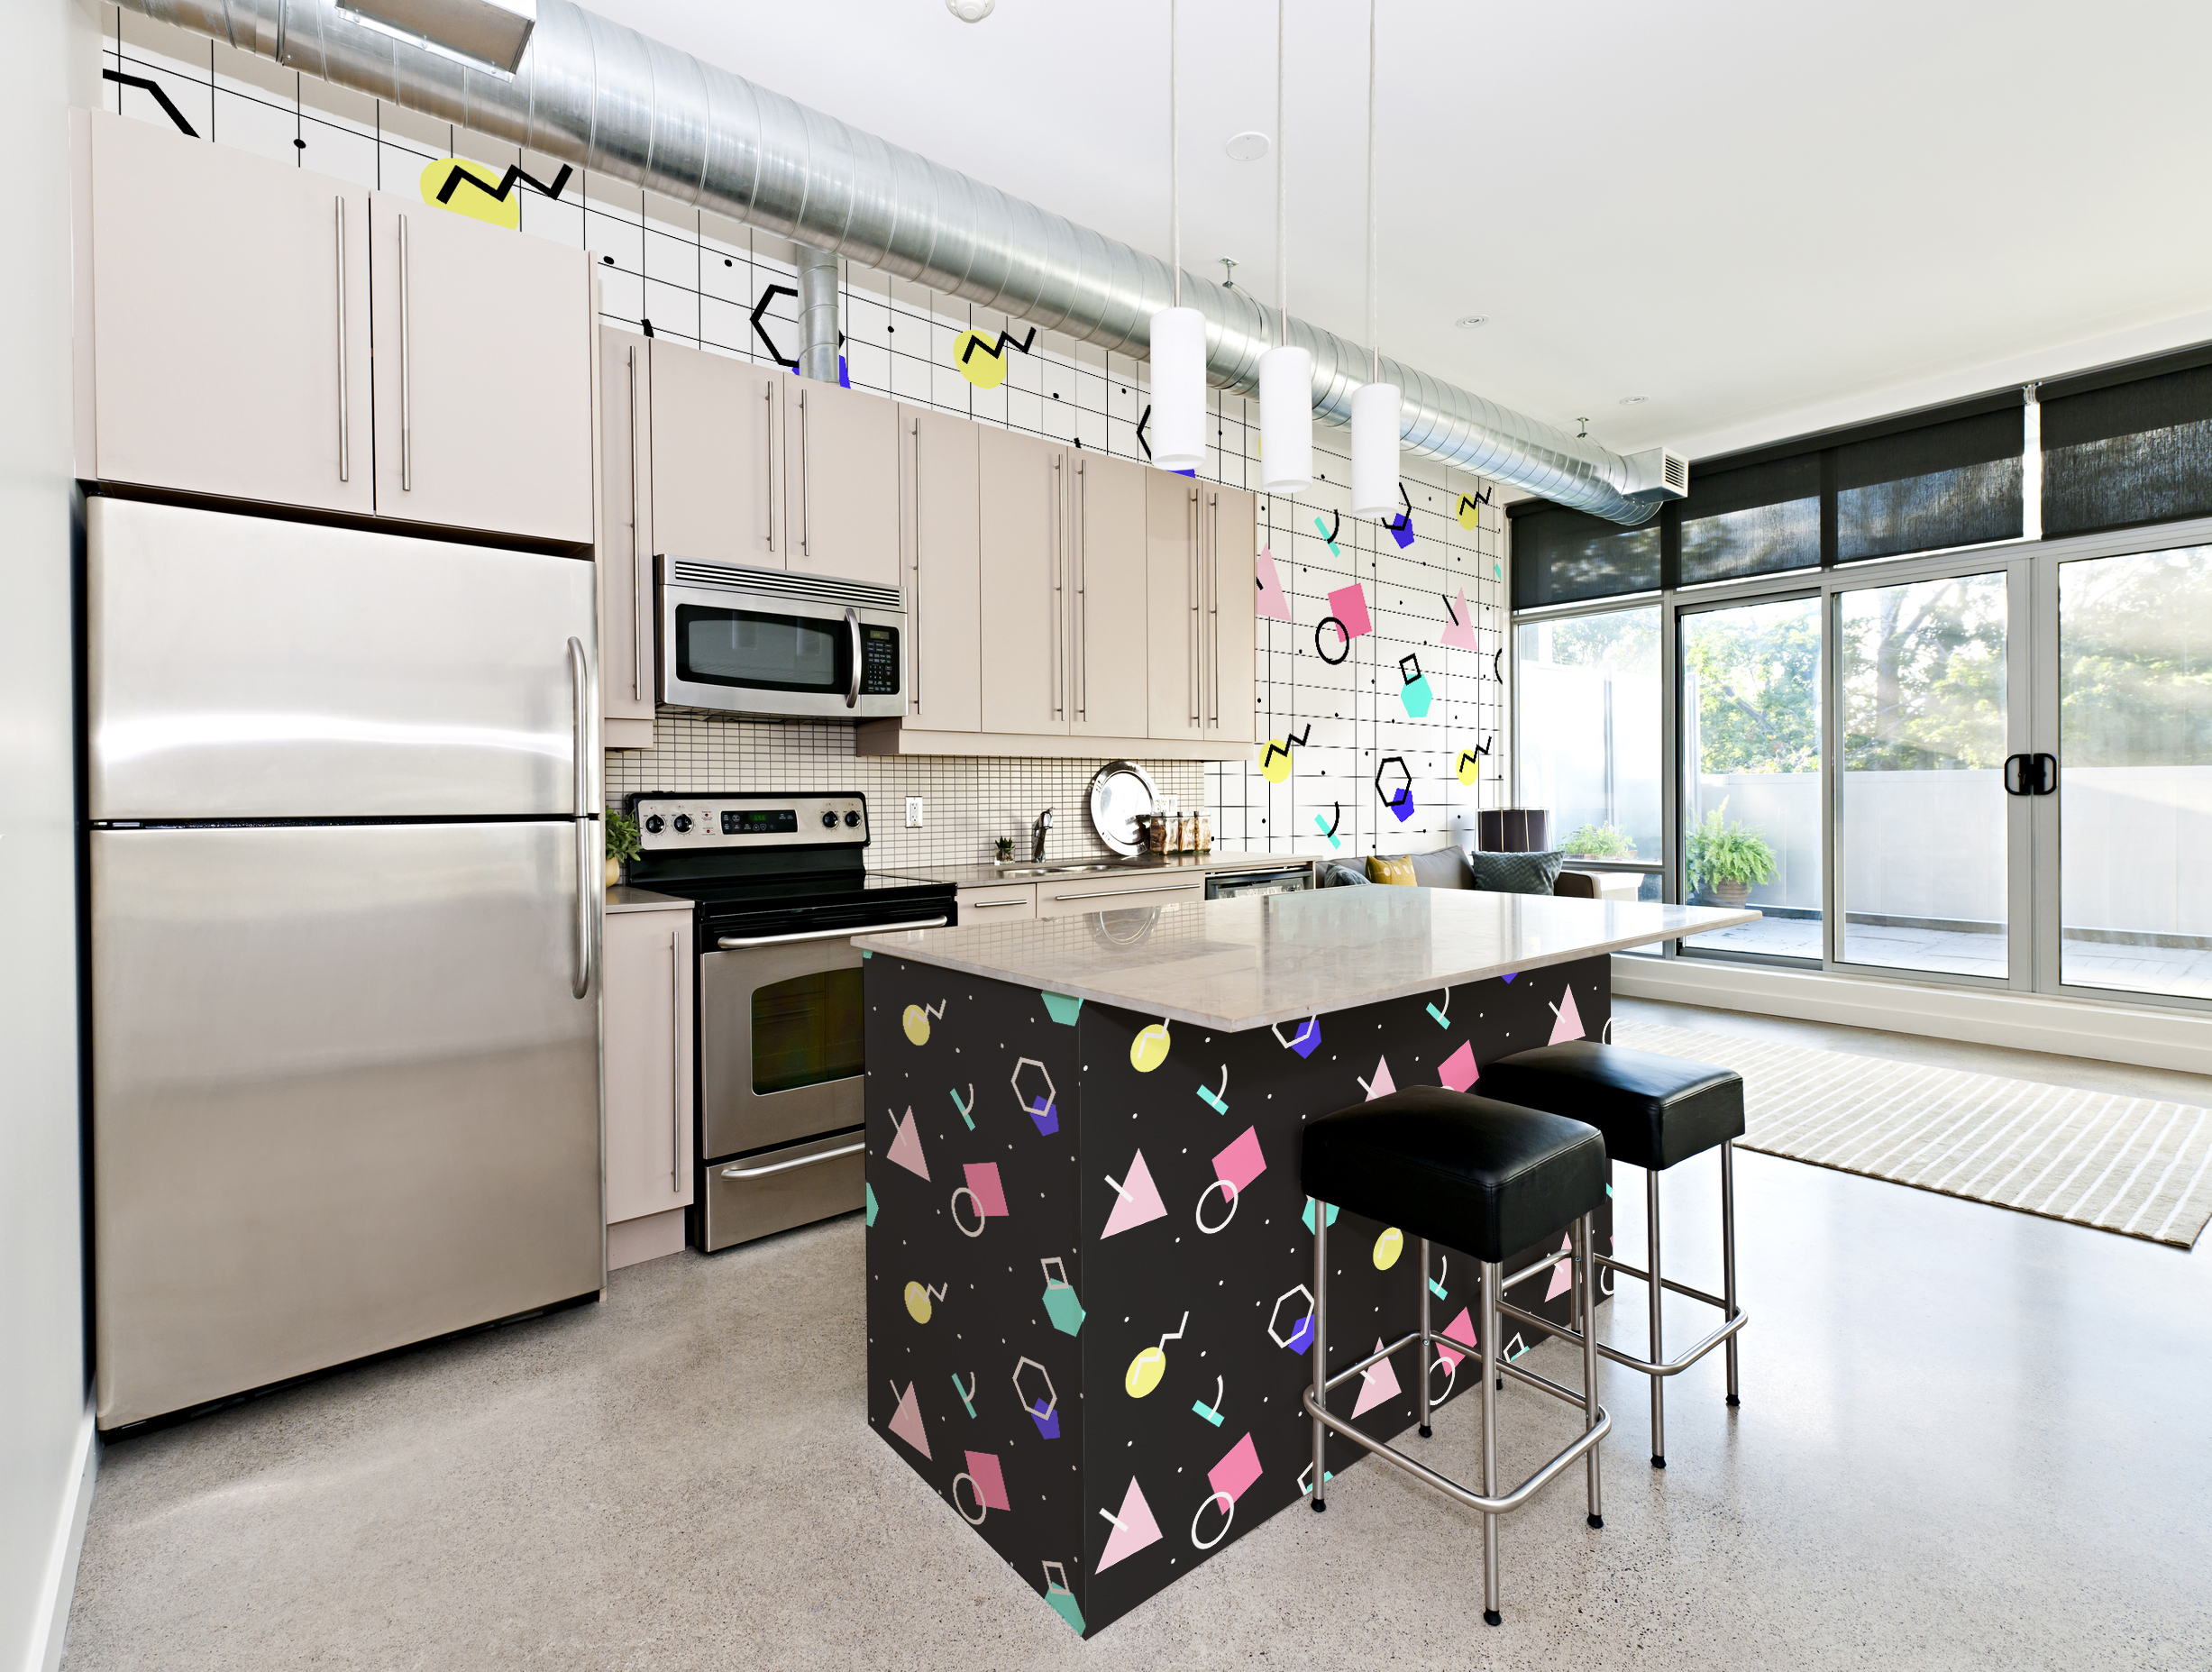 Cosmic kitchen • Kitchen - Contemporary - Abstraction - Wall Murals - Stickers